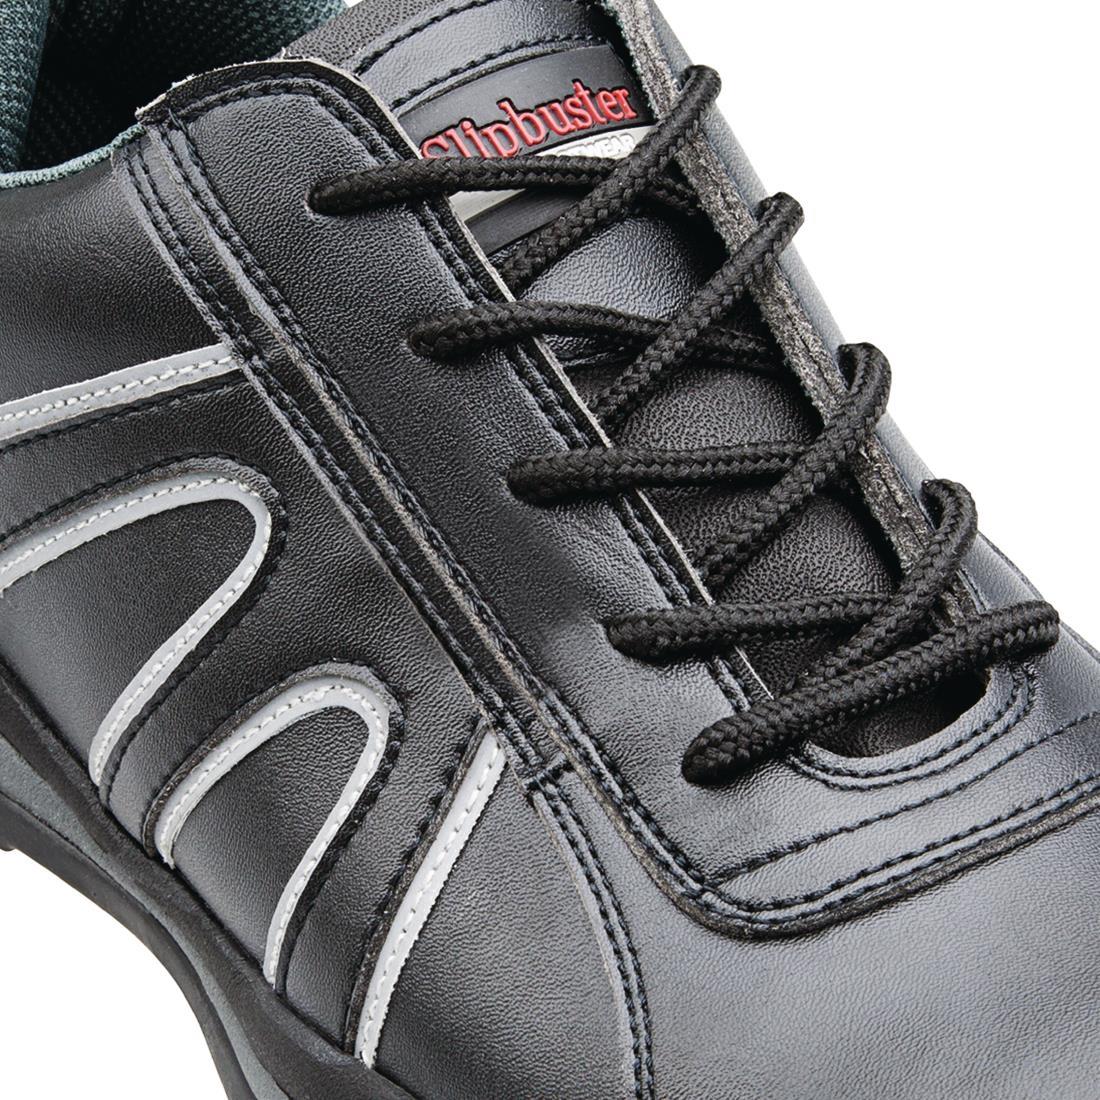 Slipbuster Safety Trainers Black 41 - A708-41  - 3